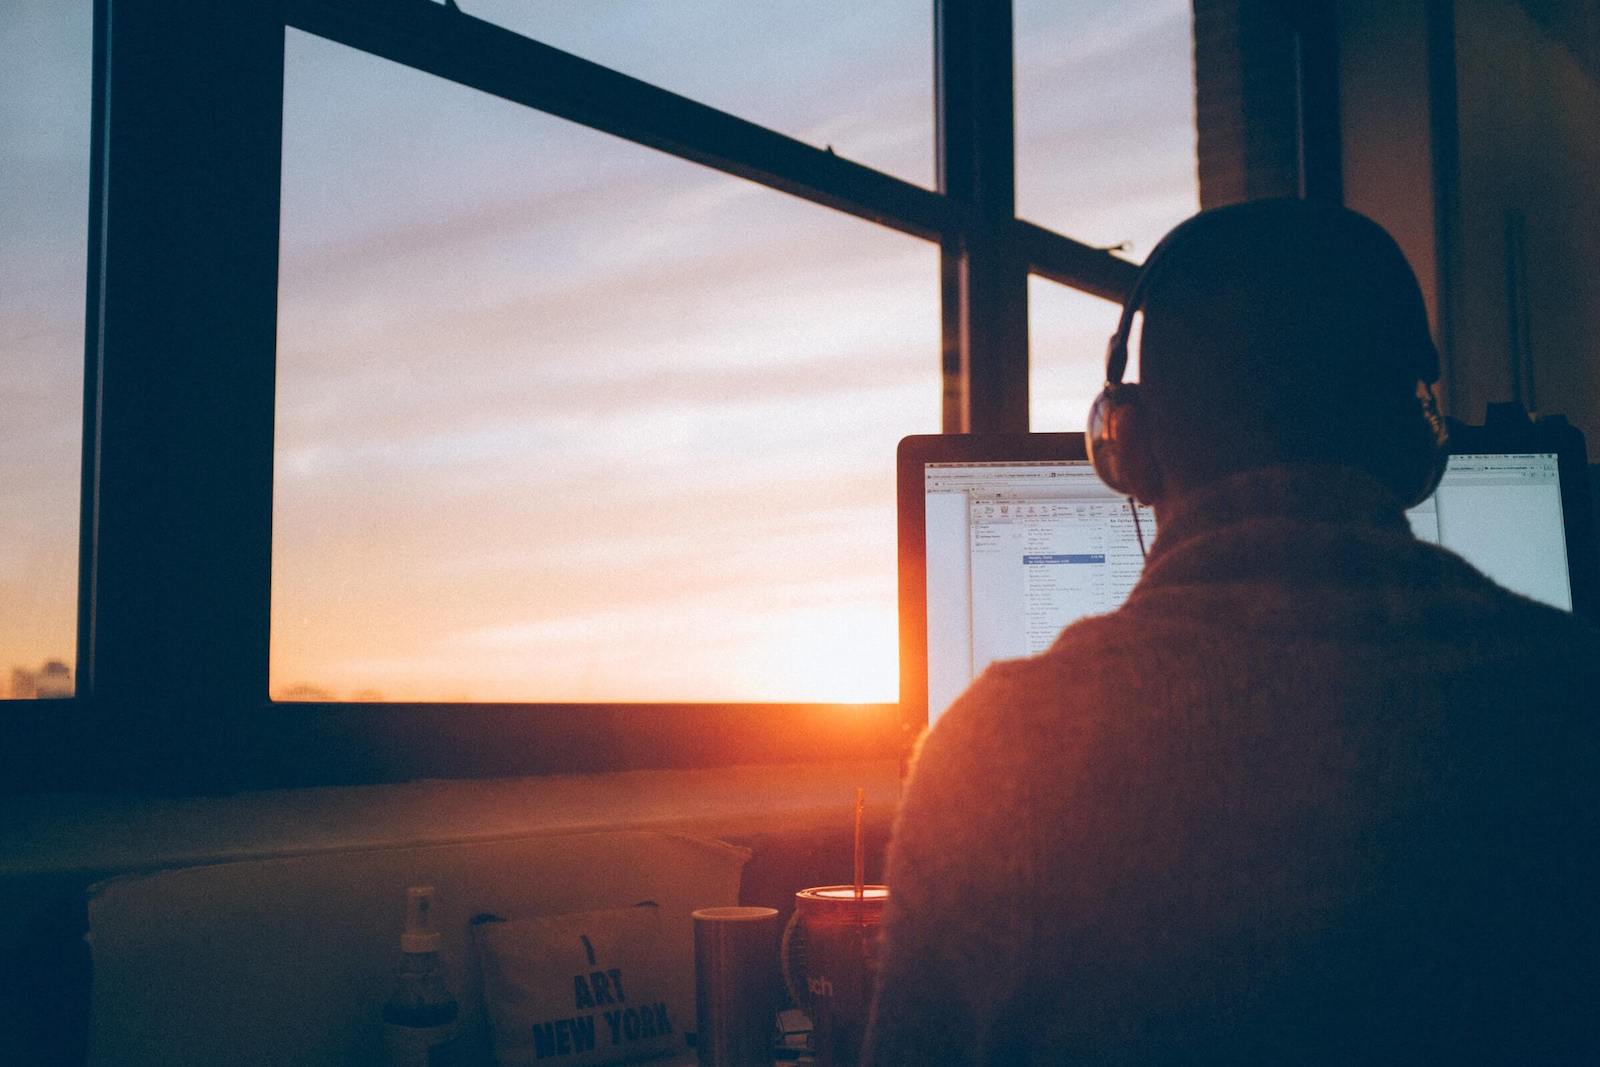 Person with headphones on using a computer looking at a sunset